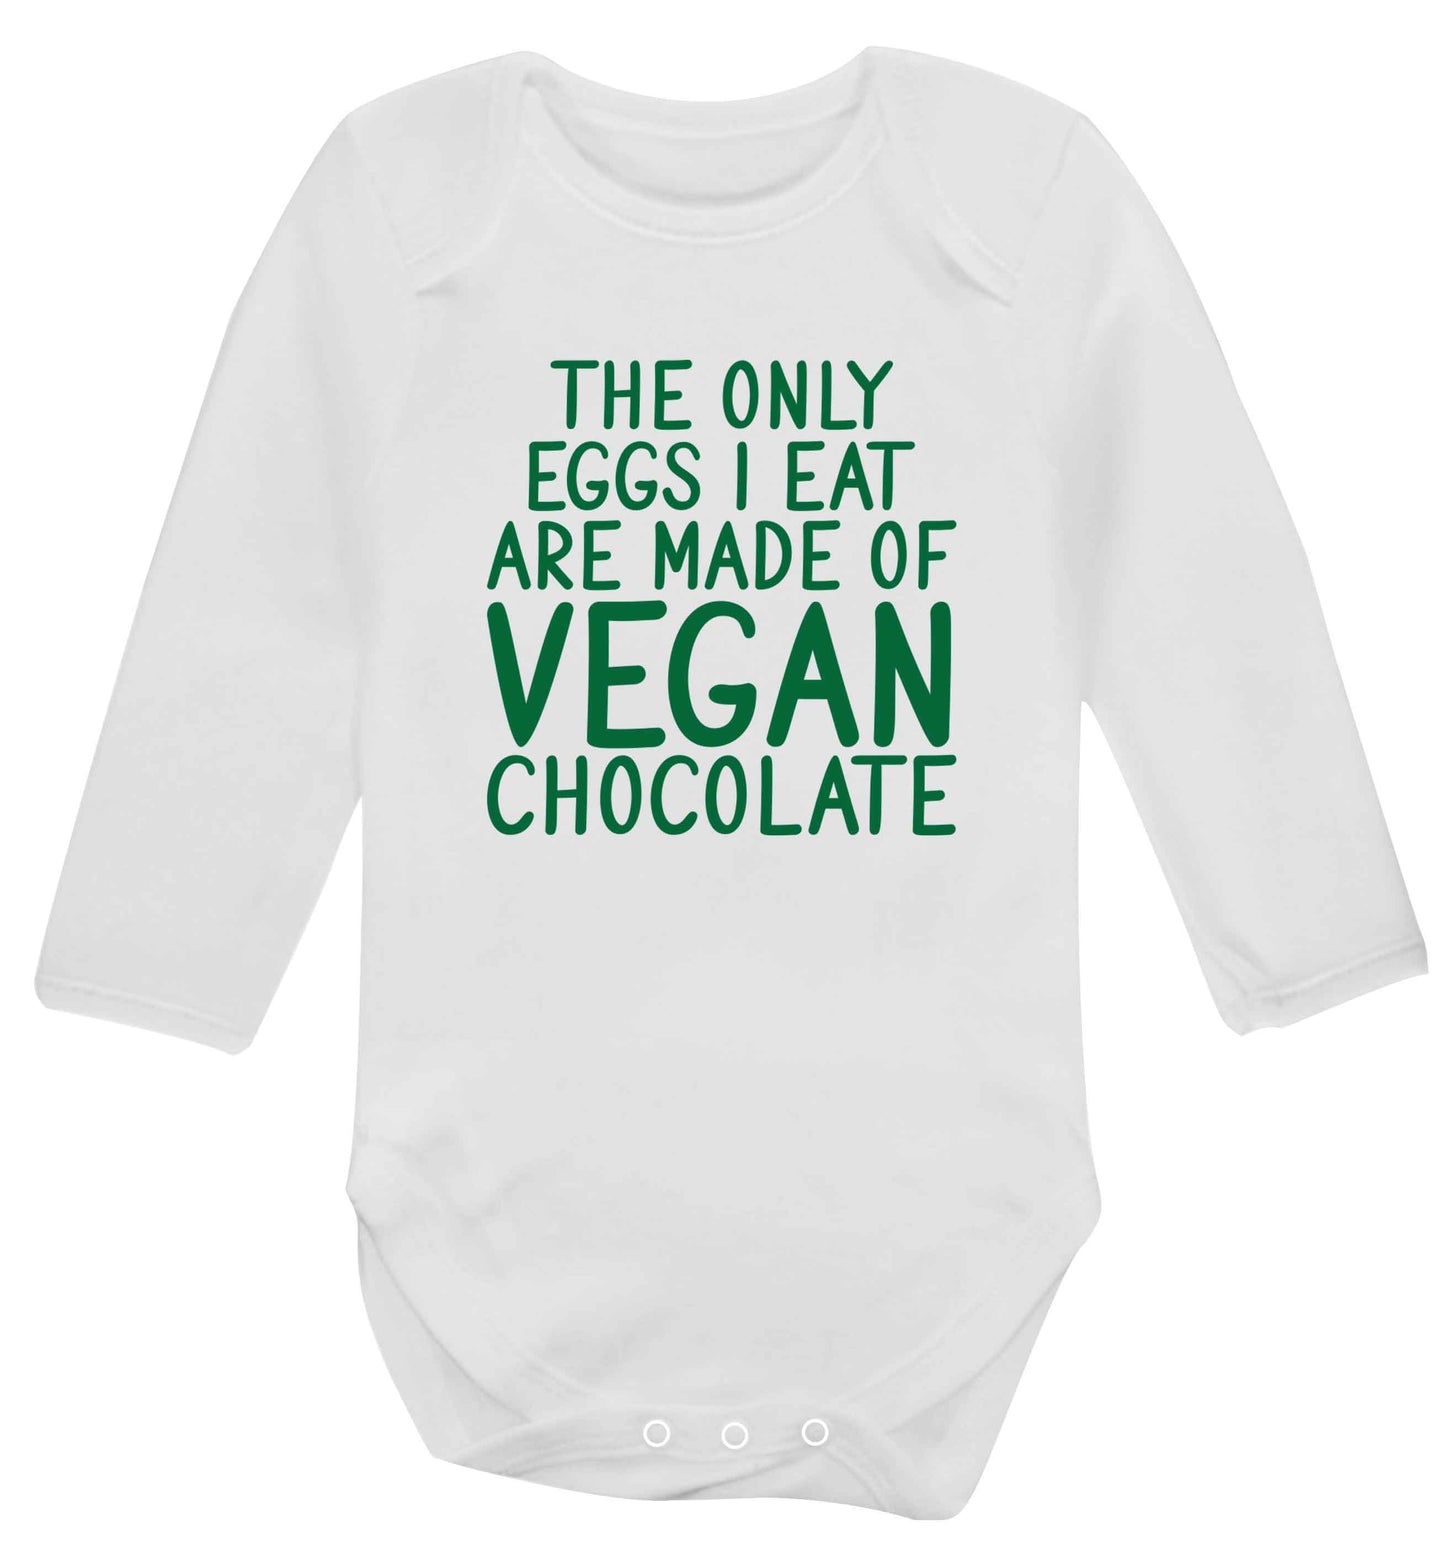 The only eggs I eat are made of vegan chocolate baby vest long sleeved white 6-12 months